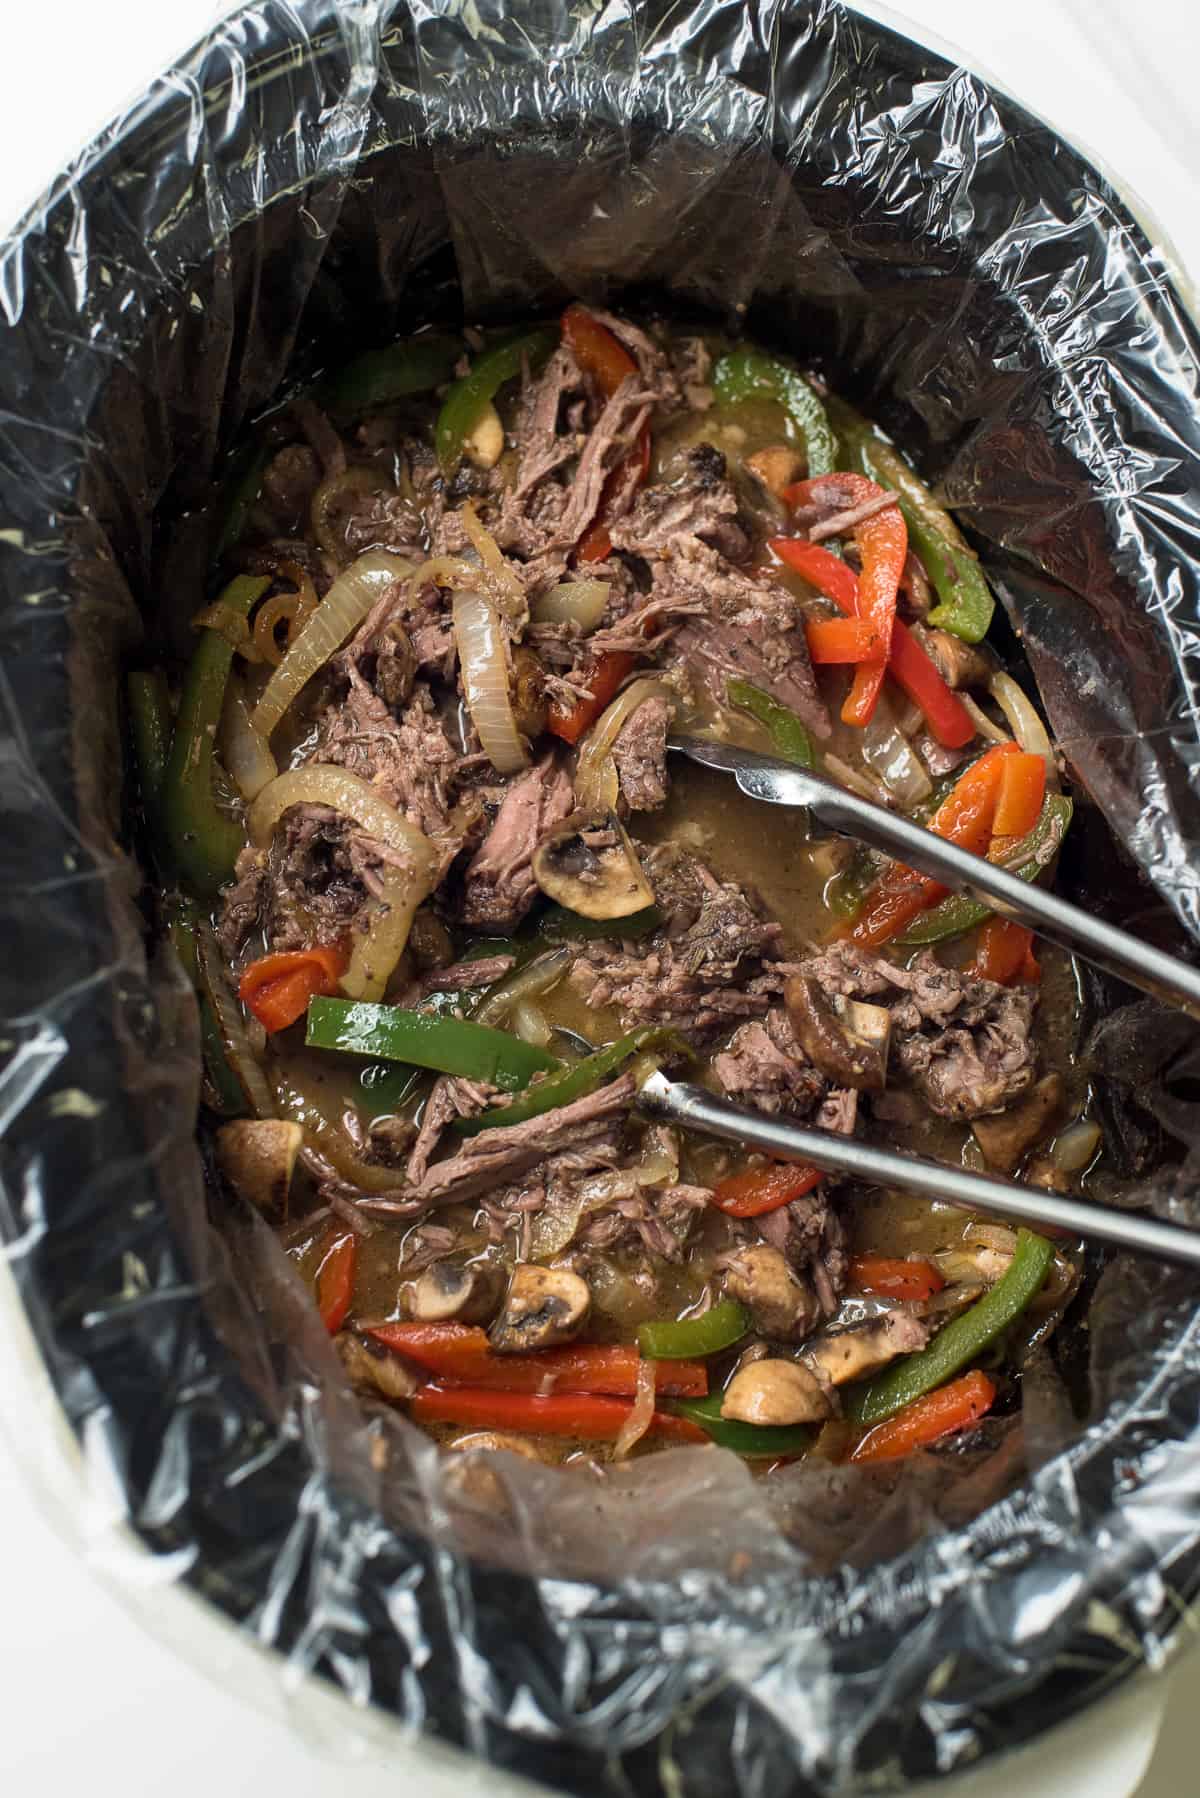 Metal tongs pressing into shredded drip beef with peppers, onions, and mushrooms in a slow cooker.